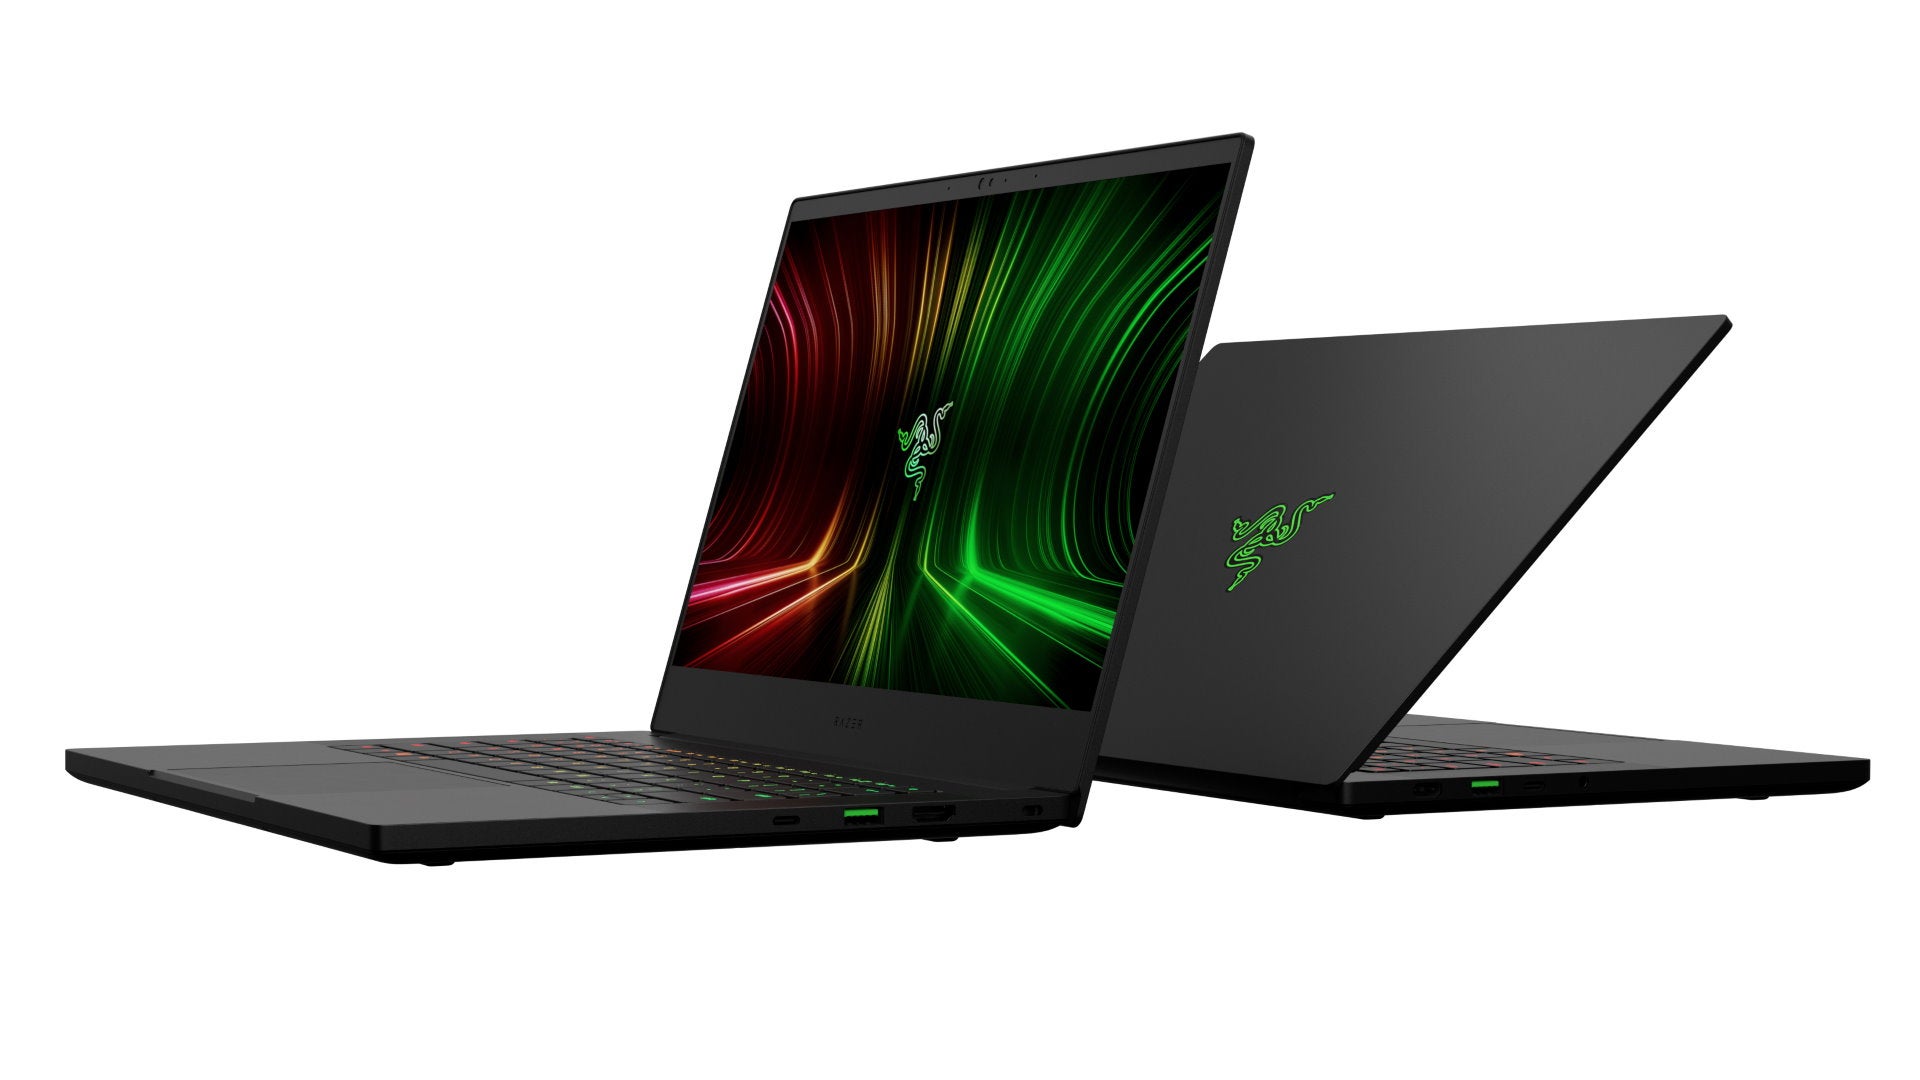 Razer's Blade 14 could be a pint-sized powerhouse with its RTX 